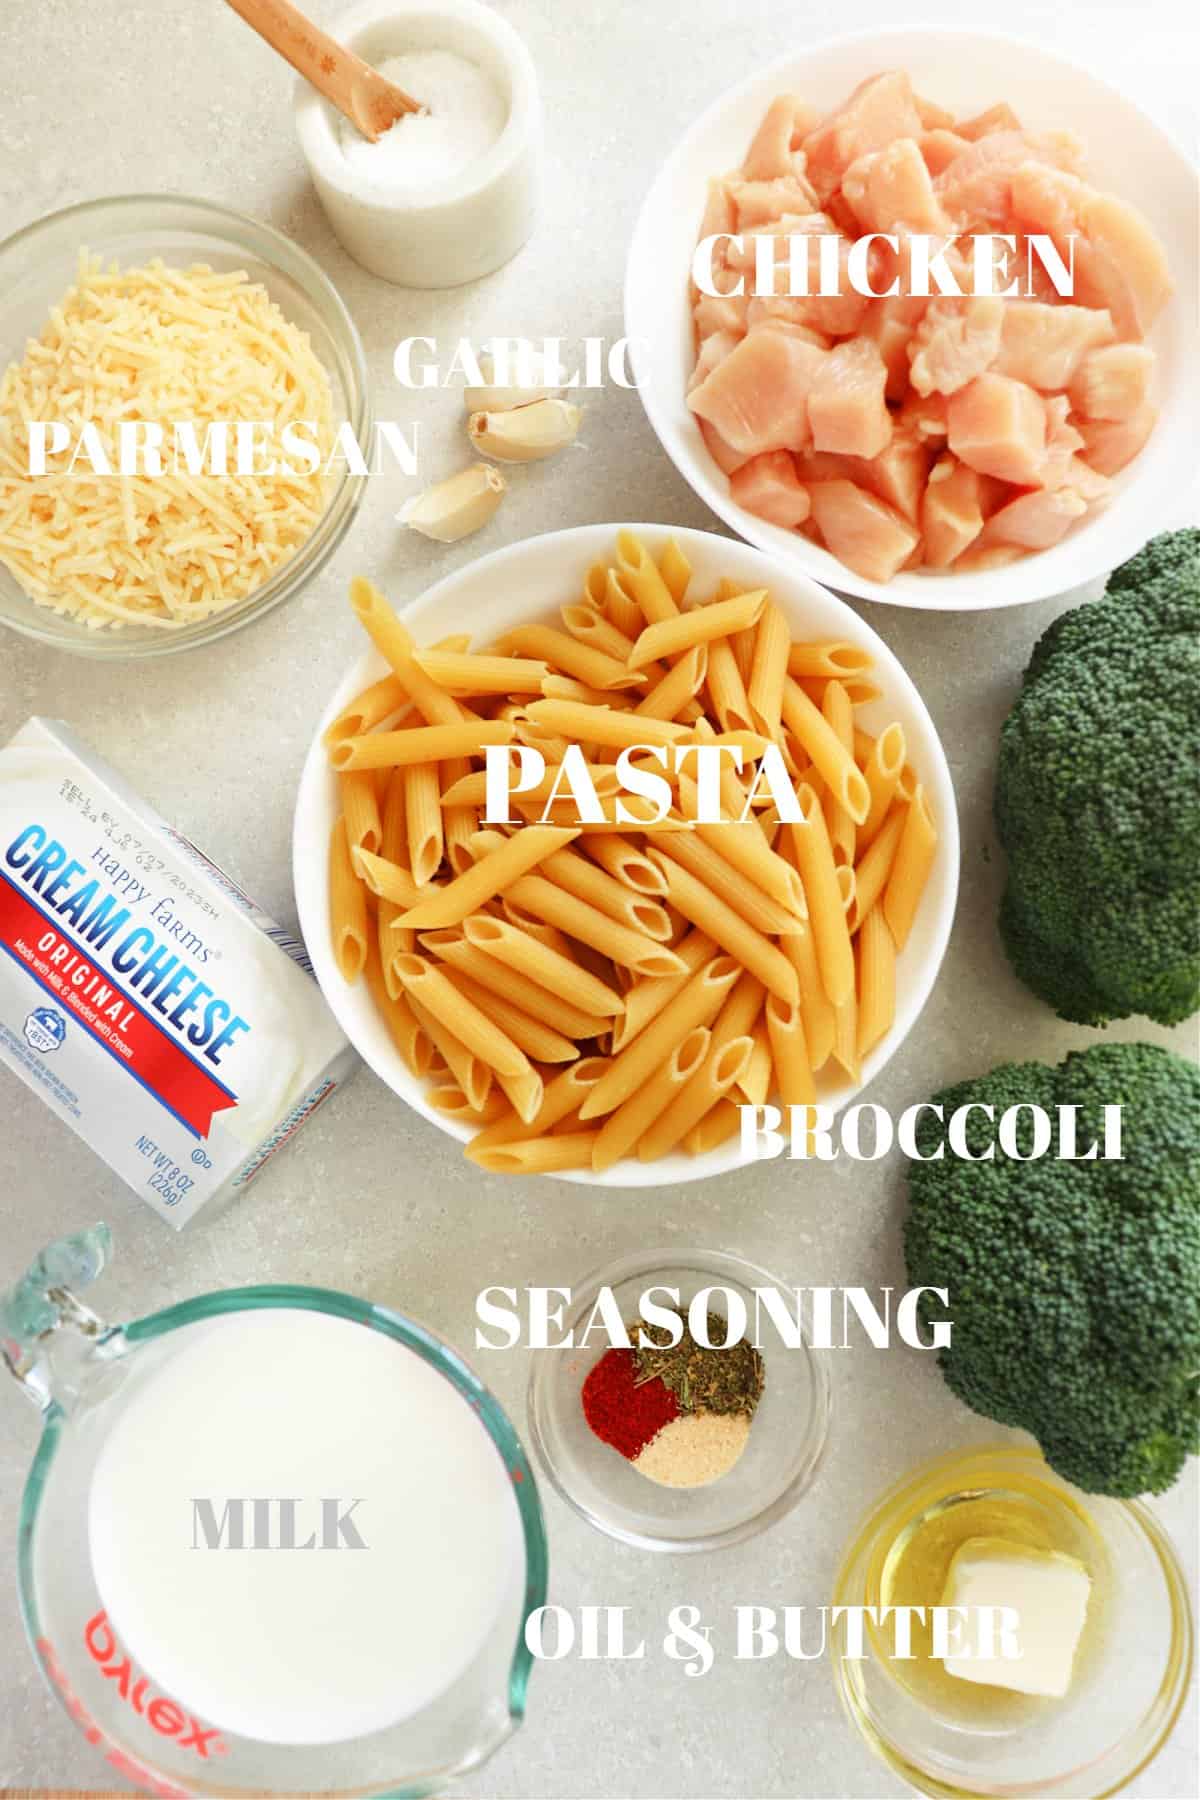 All ingredients for chicken and broccoli pasta on a gray board.